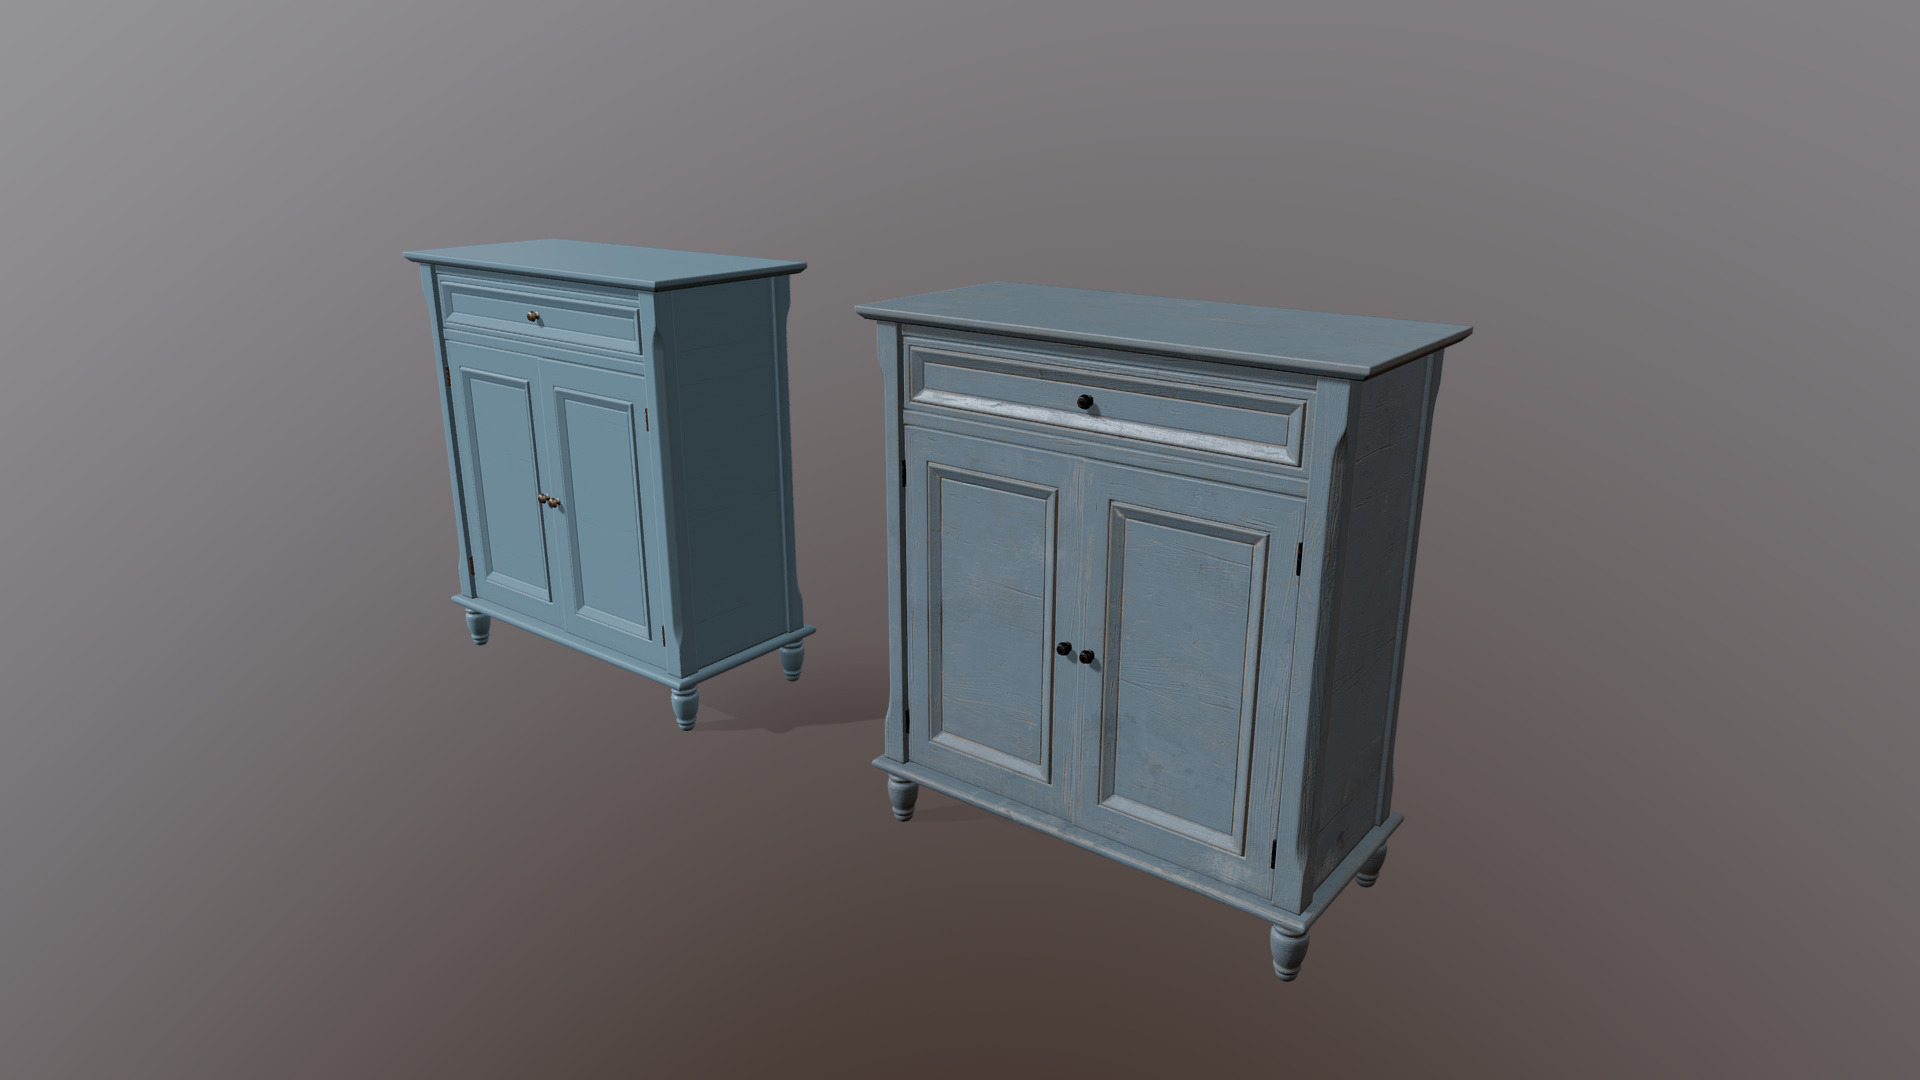 3D model Game Art: Cabinets - This is a 3D model of the Game Art: Cabinets. The 3D model is about a couple of blue cabinets.